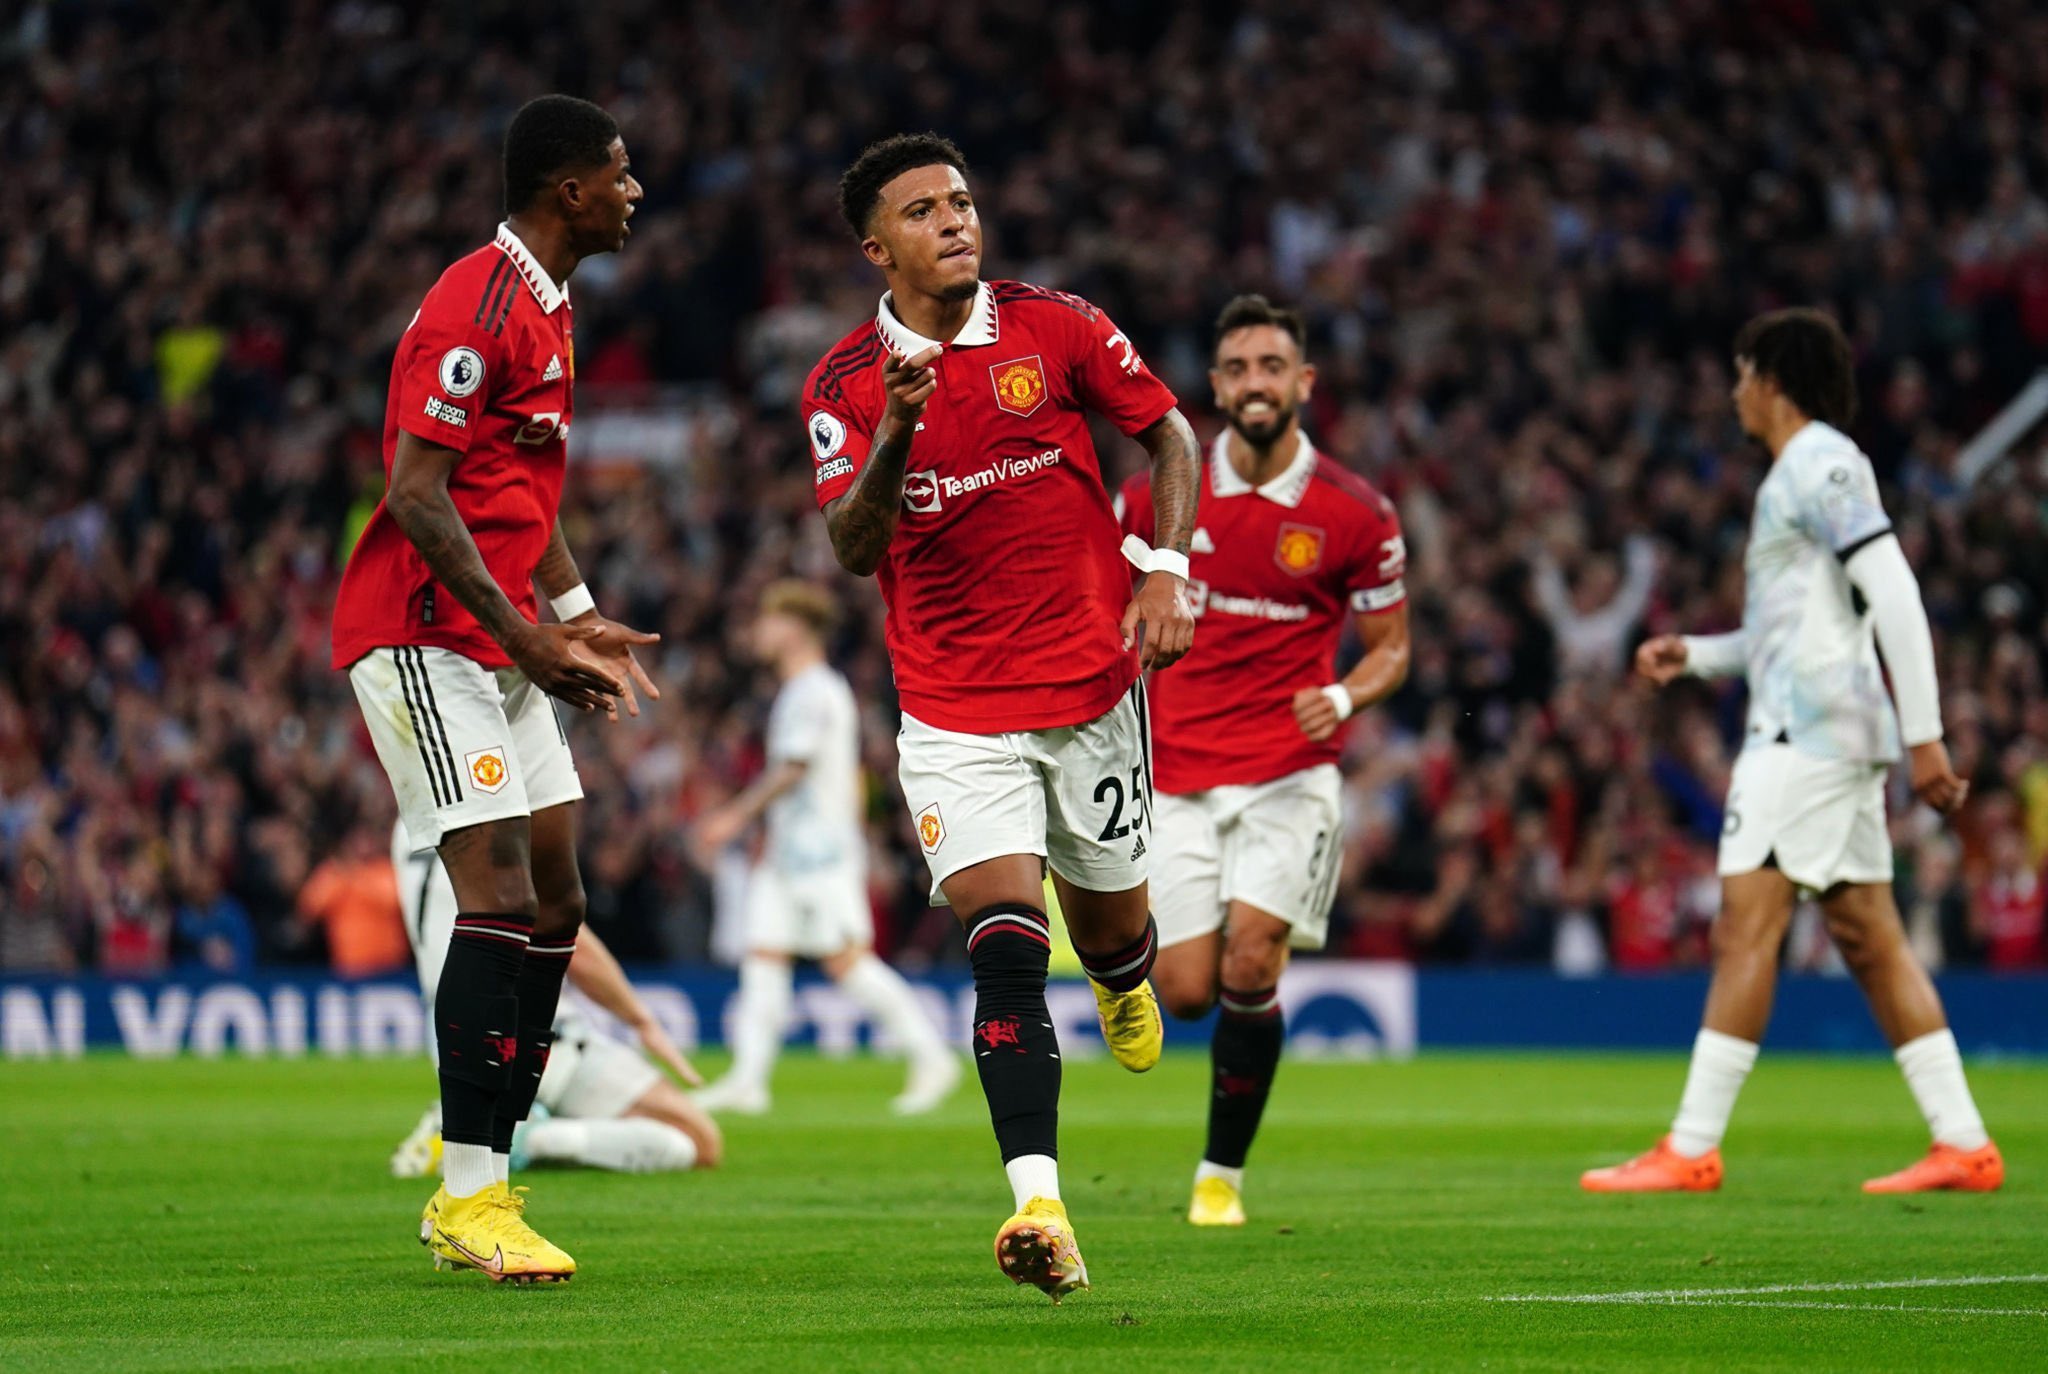 Jason Sancho opened the scoring as Manchester United defeated Liverpool 2-1